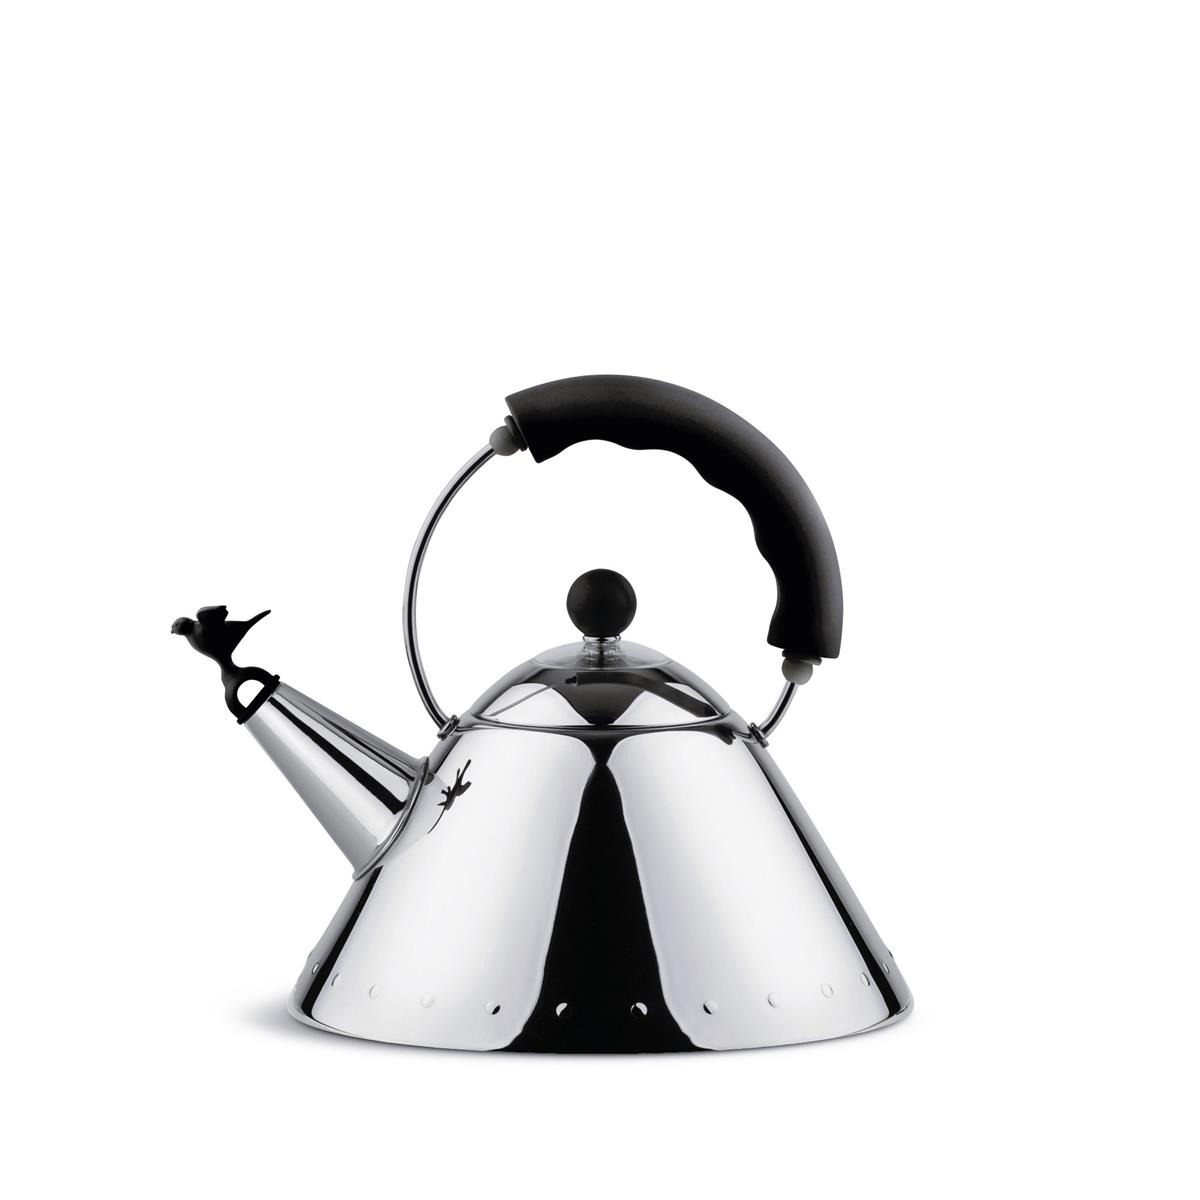 photo kettle in 18/10 stainless steel suitable for induction